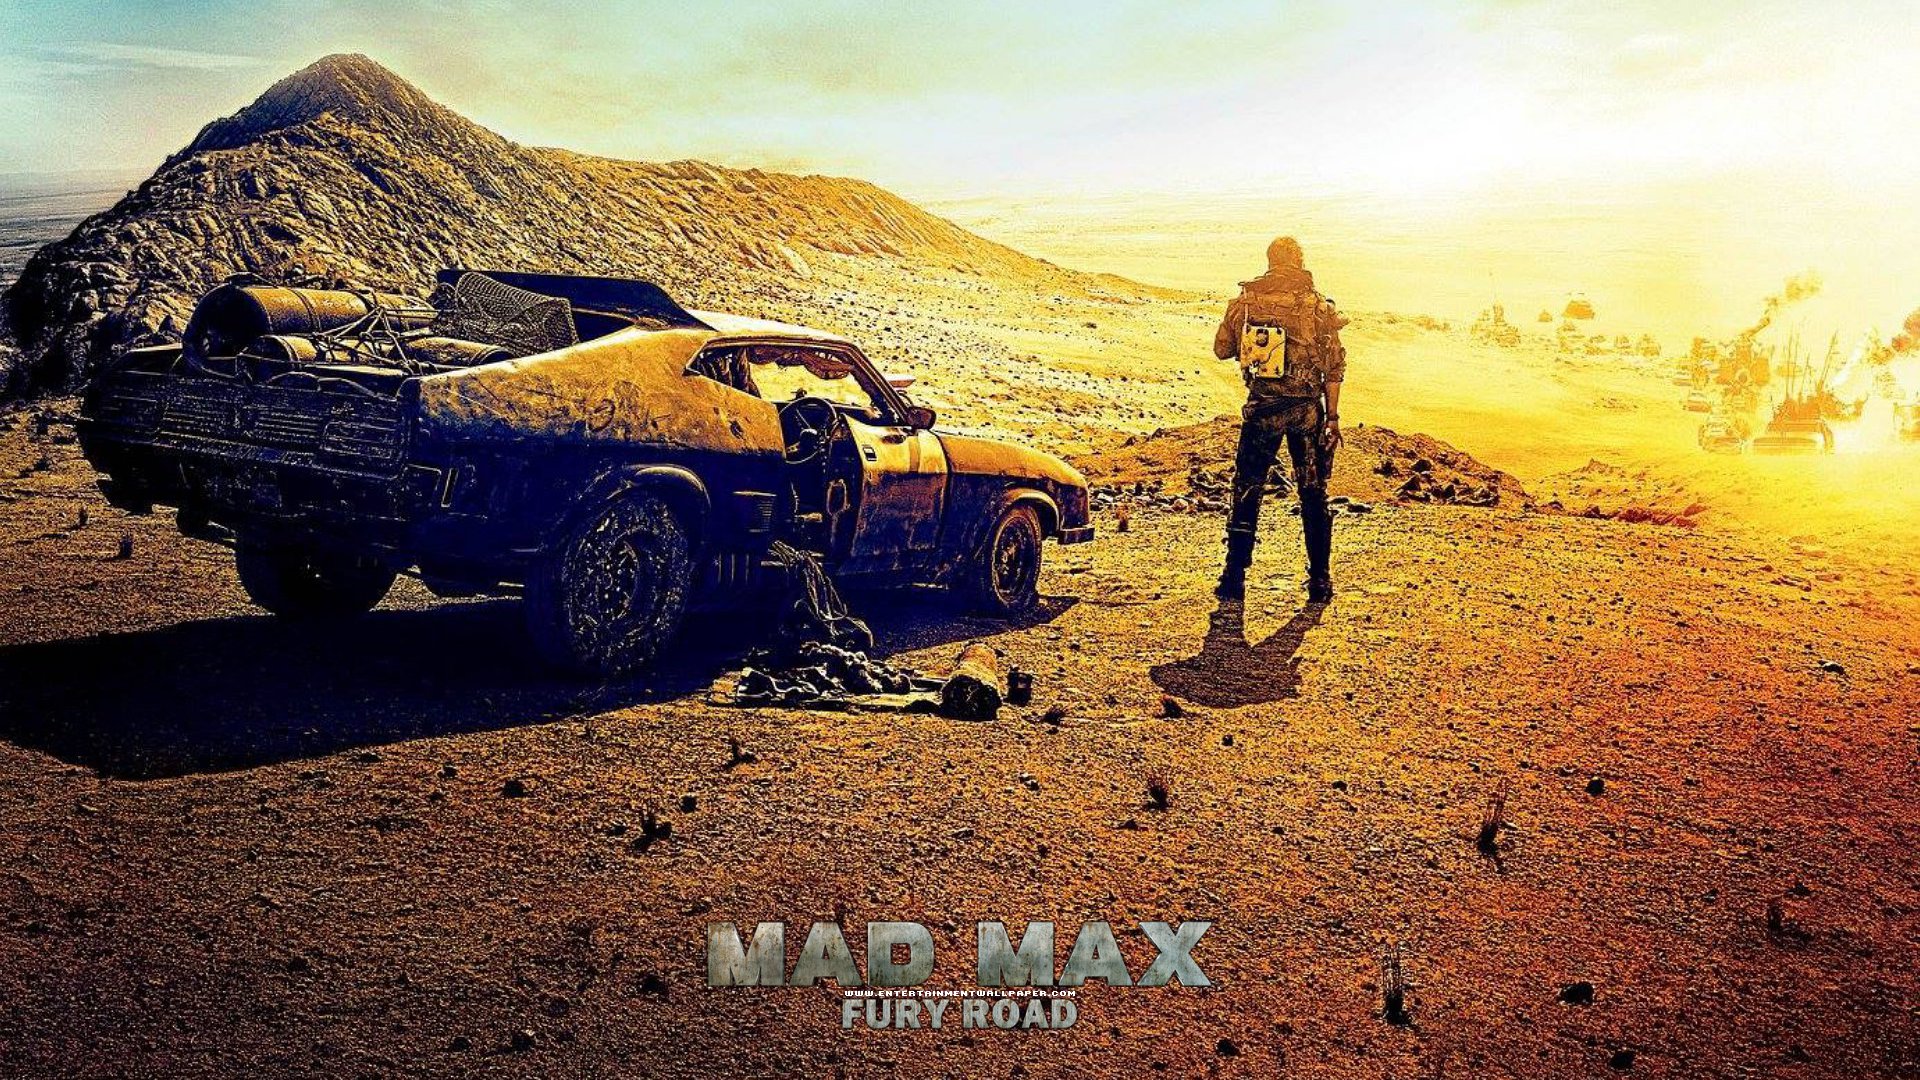 Mad Max: Fury Road' is an Ultra HD Blu-ray launch title